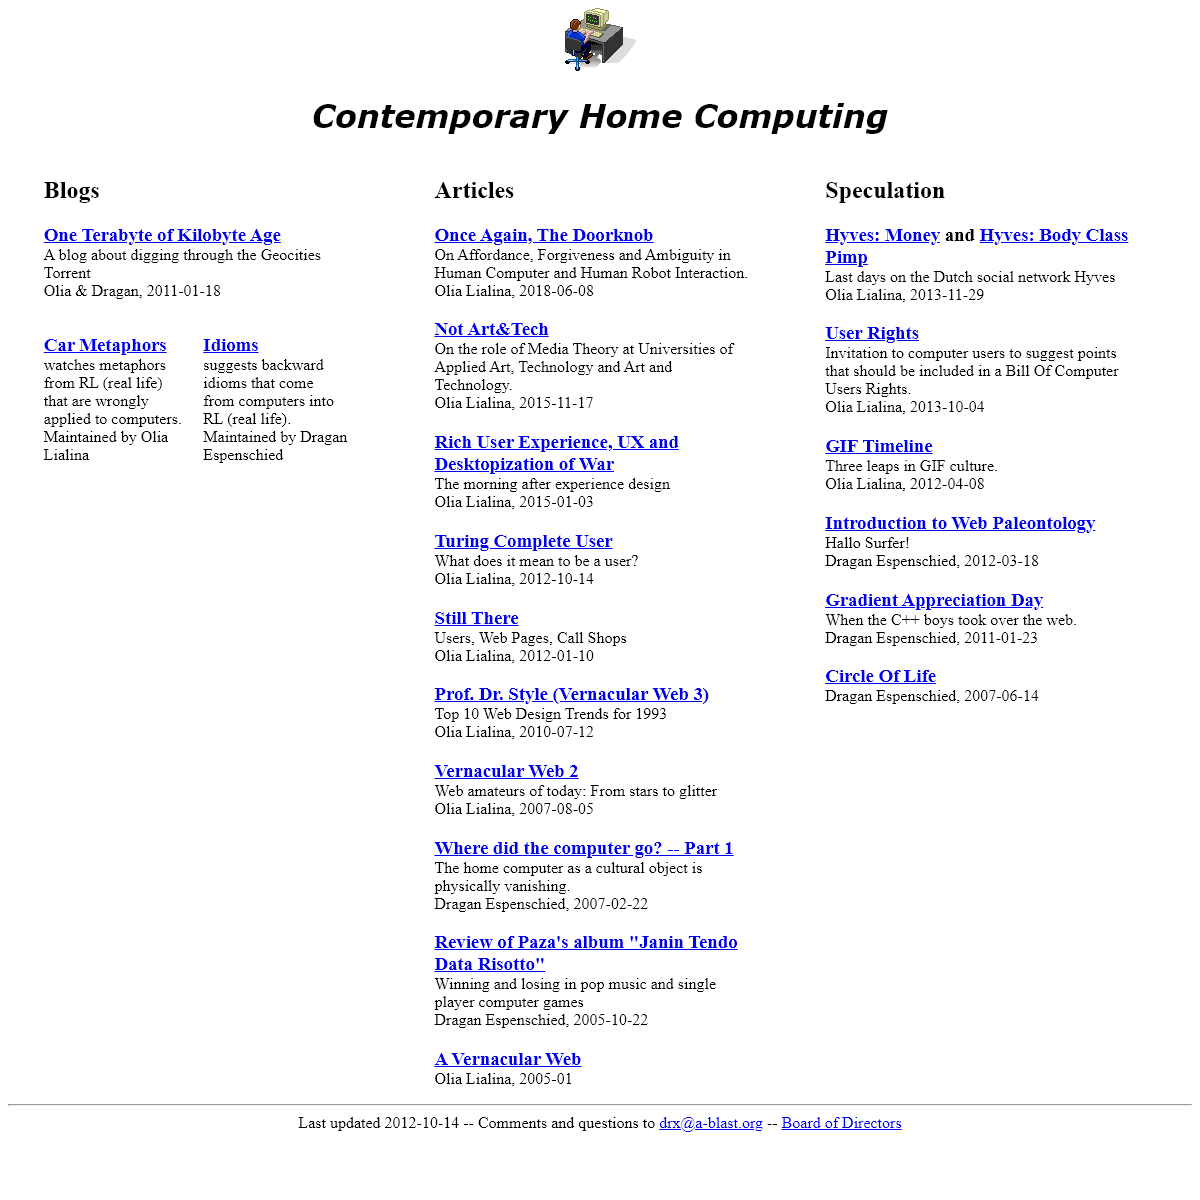 A complete backup of contemporary-home-computing.org